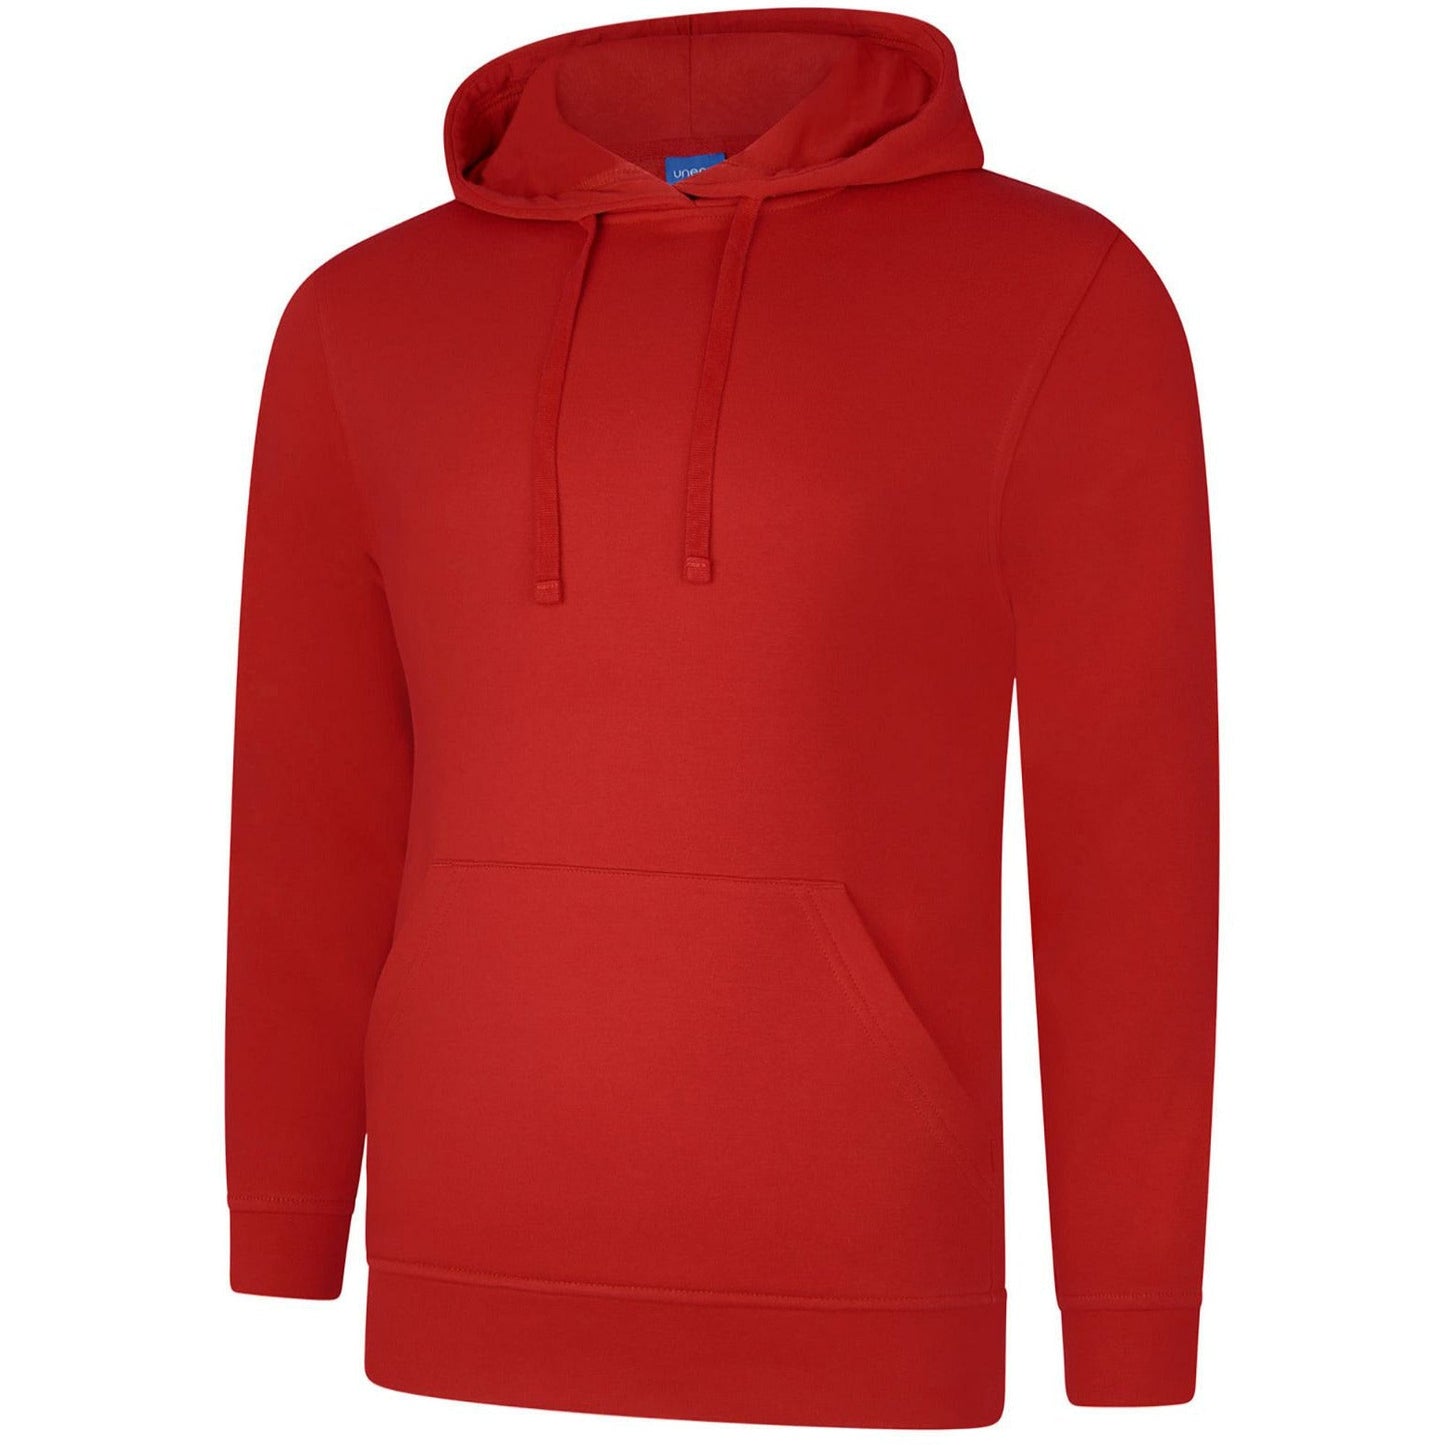 Deluxe Hooded Sweatshirt (XS - M) Sizzling Red